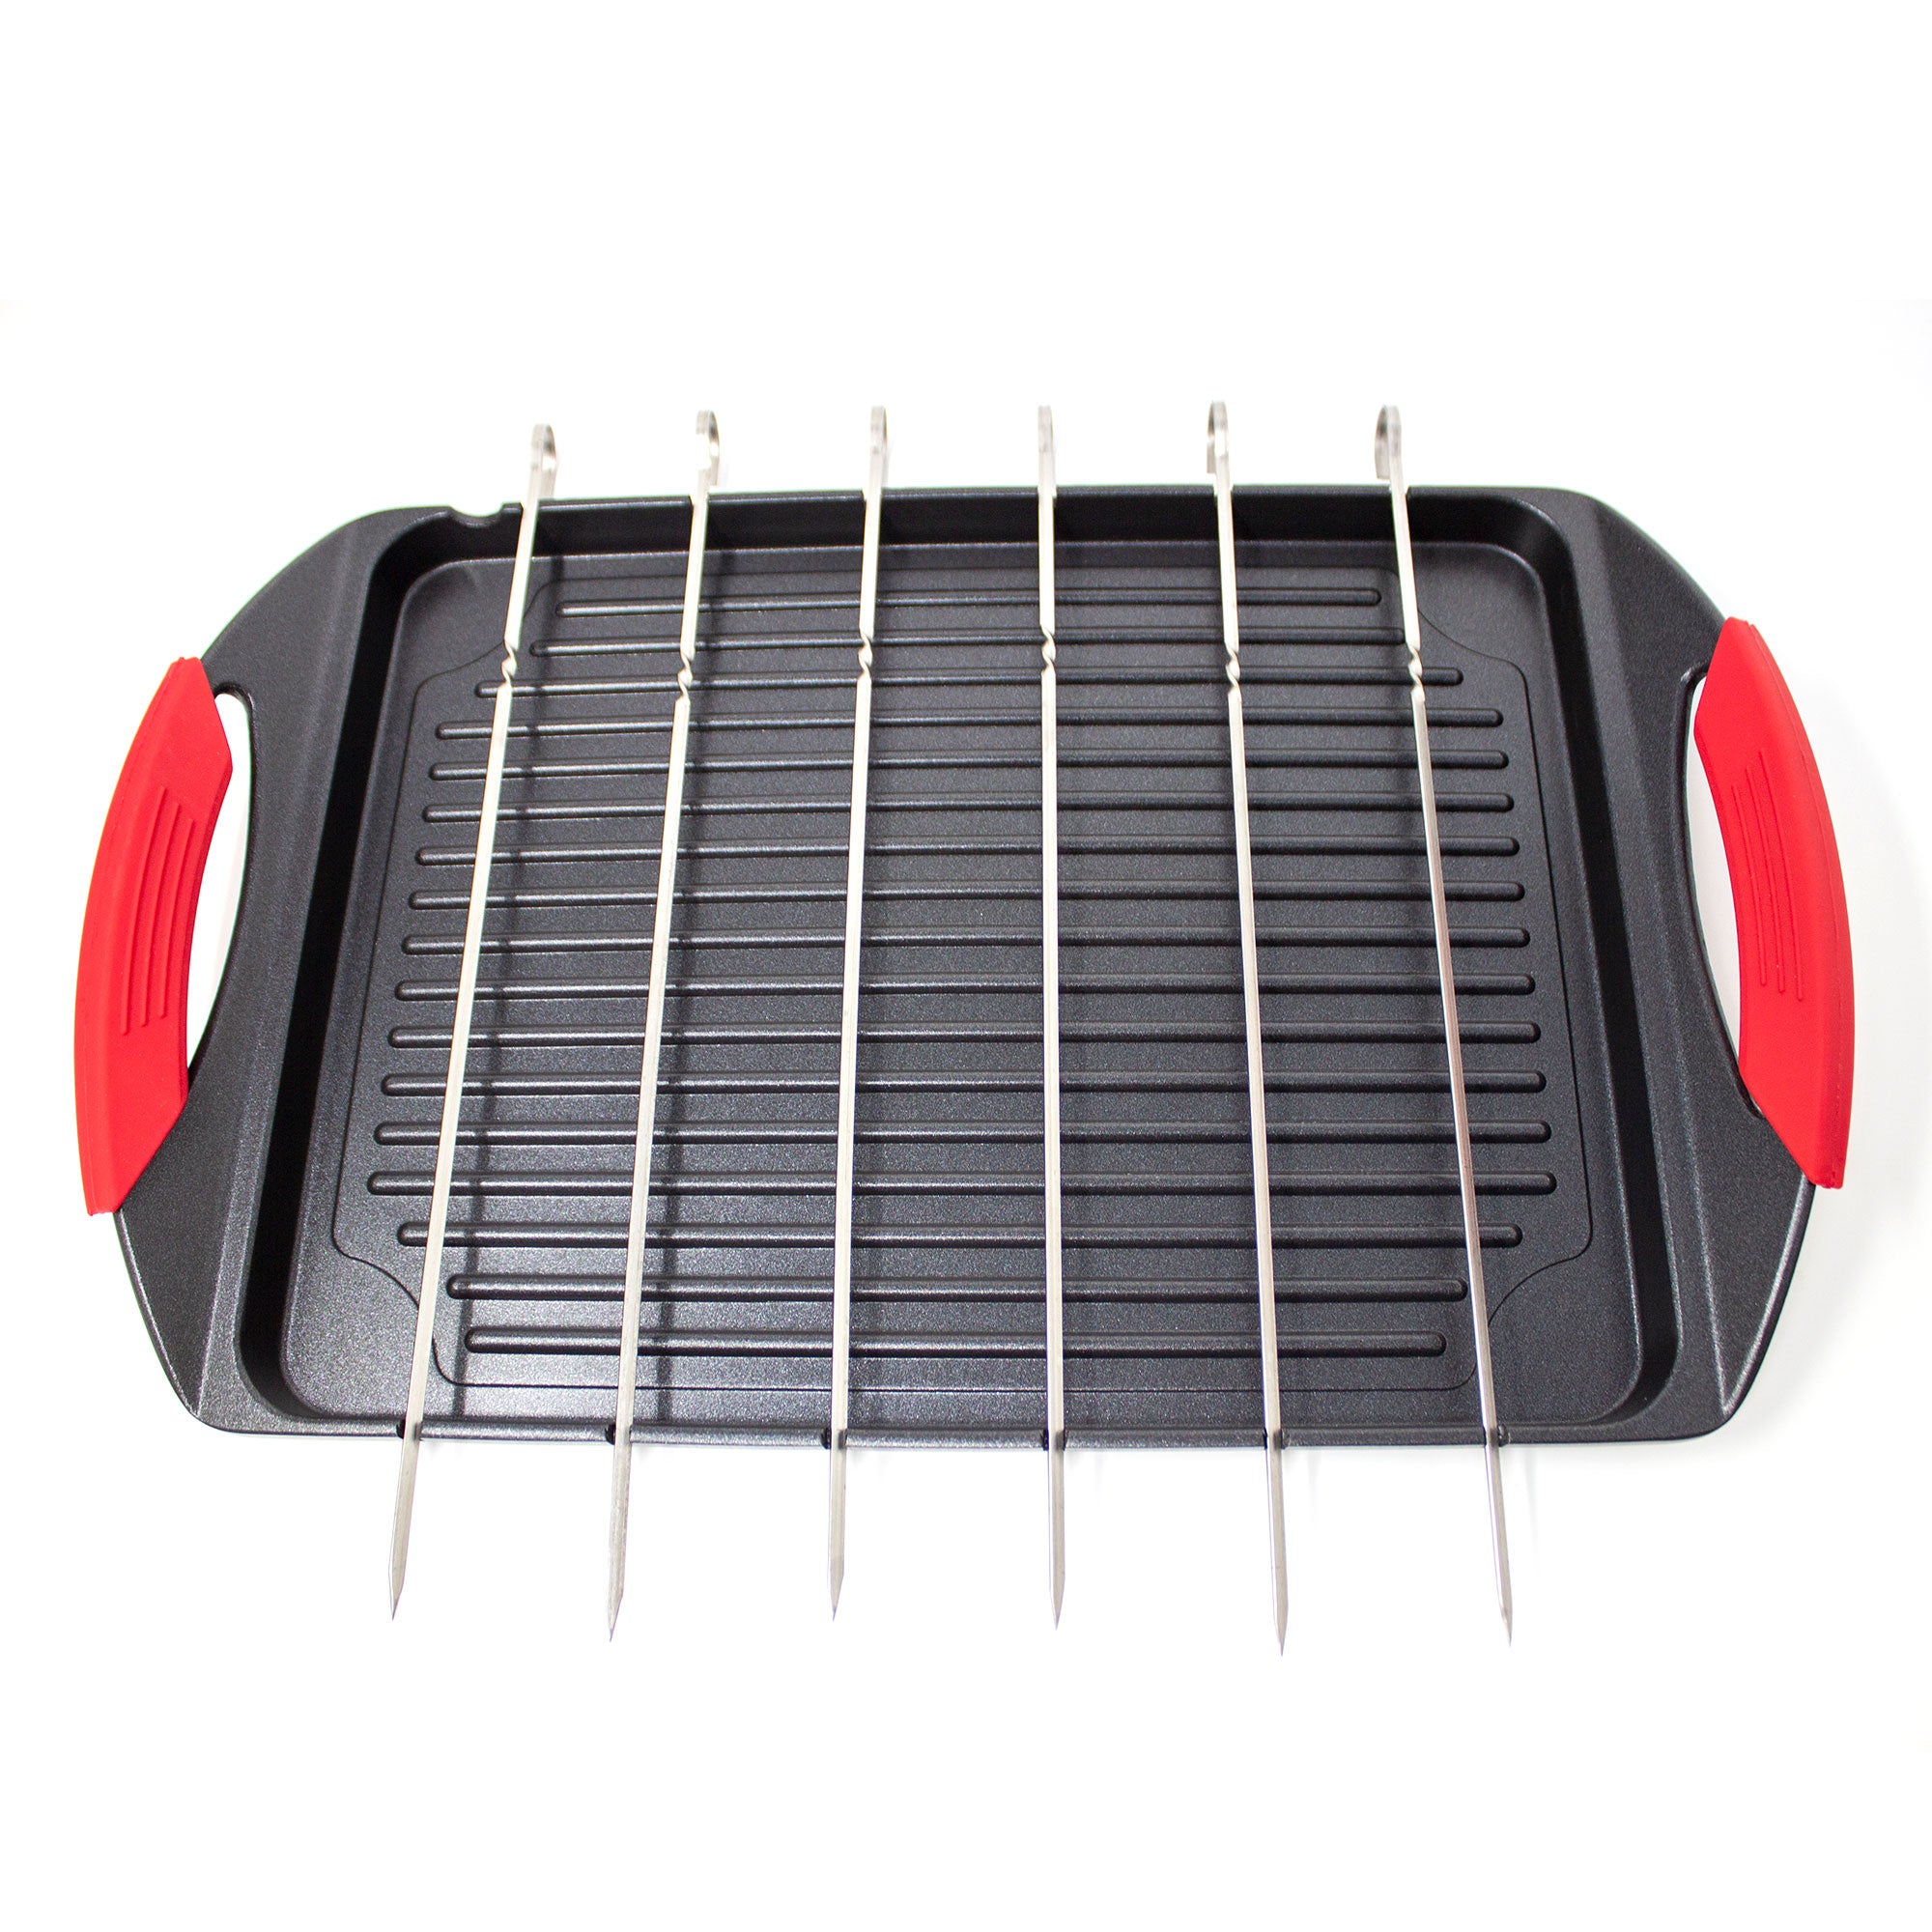 The Griddle Me This Cast Aluminium Griddle Plate & 6 Stainless Steel Skewers